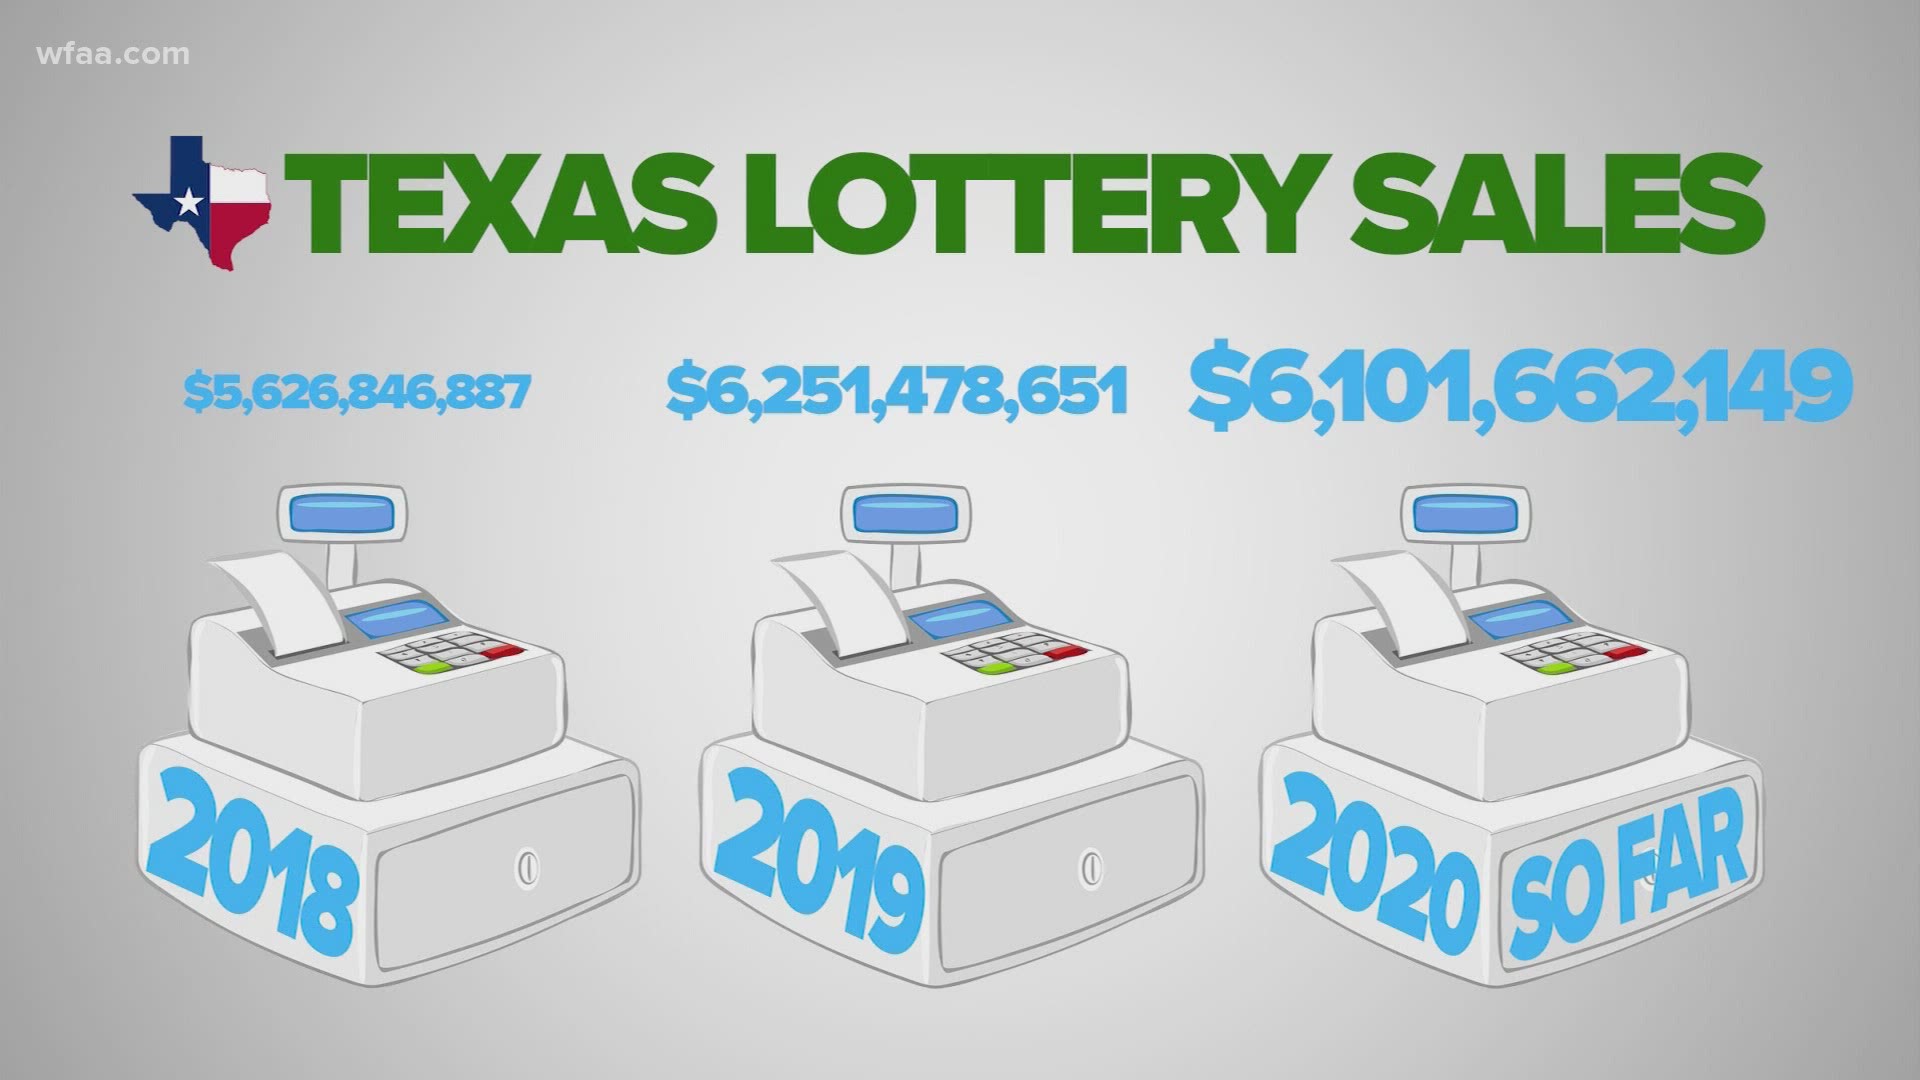 The education fund that receives money from Texas lottery sales may have a record-setting year in 2020.